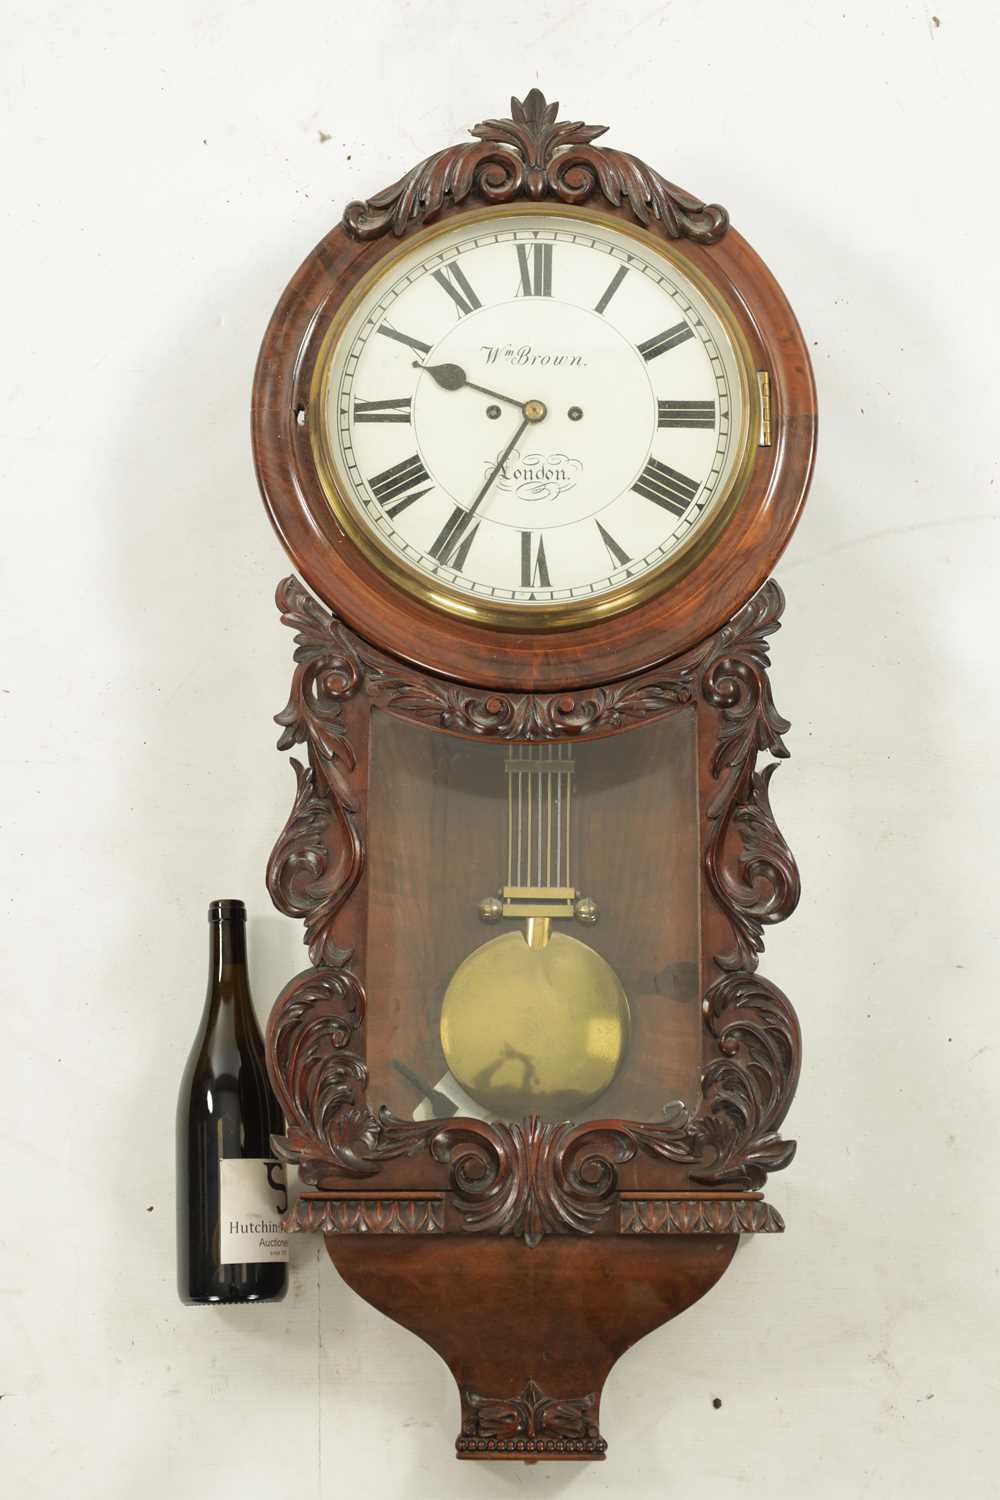 W. BROWN. LONDON. A LATE 19TH CENTURY CARVED WALNUT DOUBLE FUSEE WALL CLOCK - Image 2 of 8